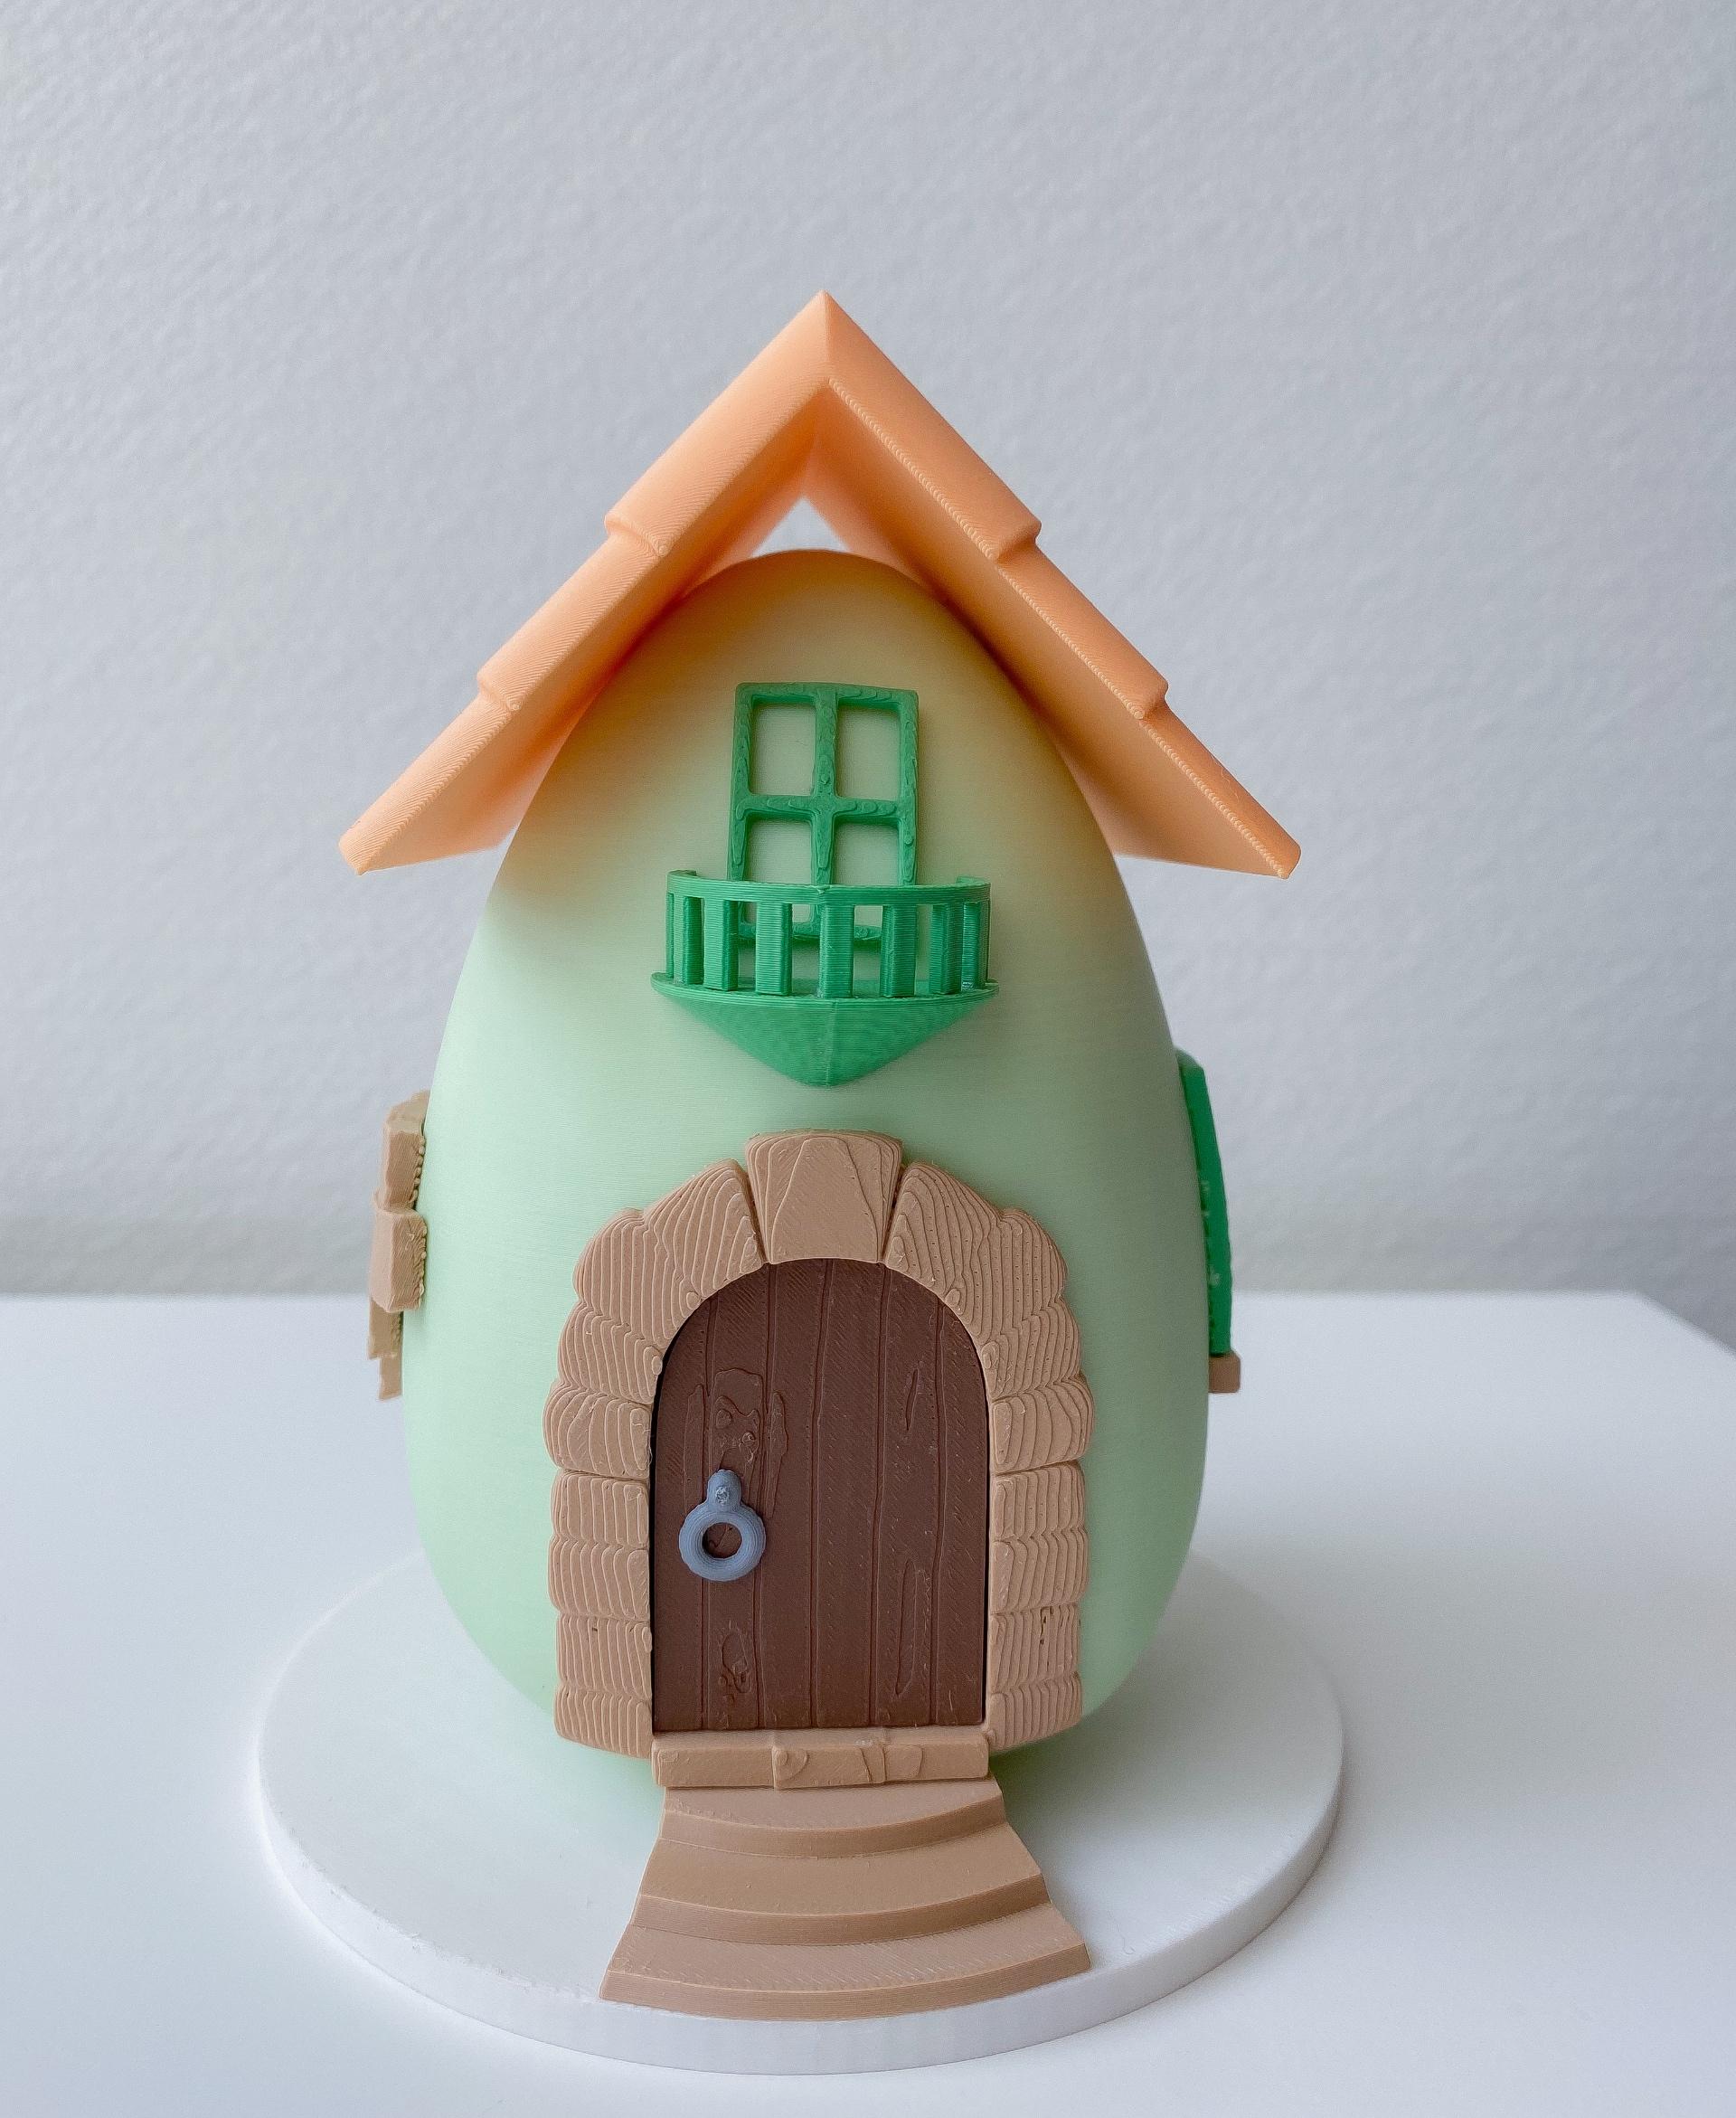 Easter egg house - Check out the cutest egg house.
Polymaker filament - 3d model